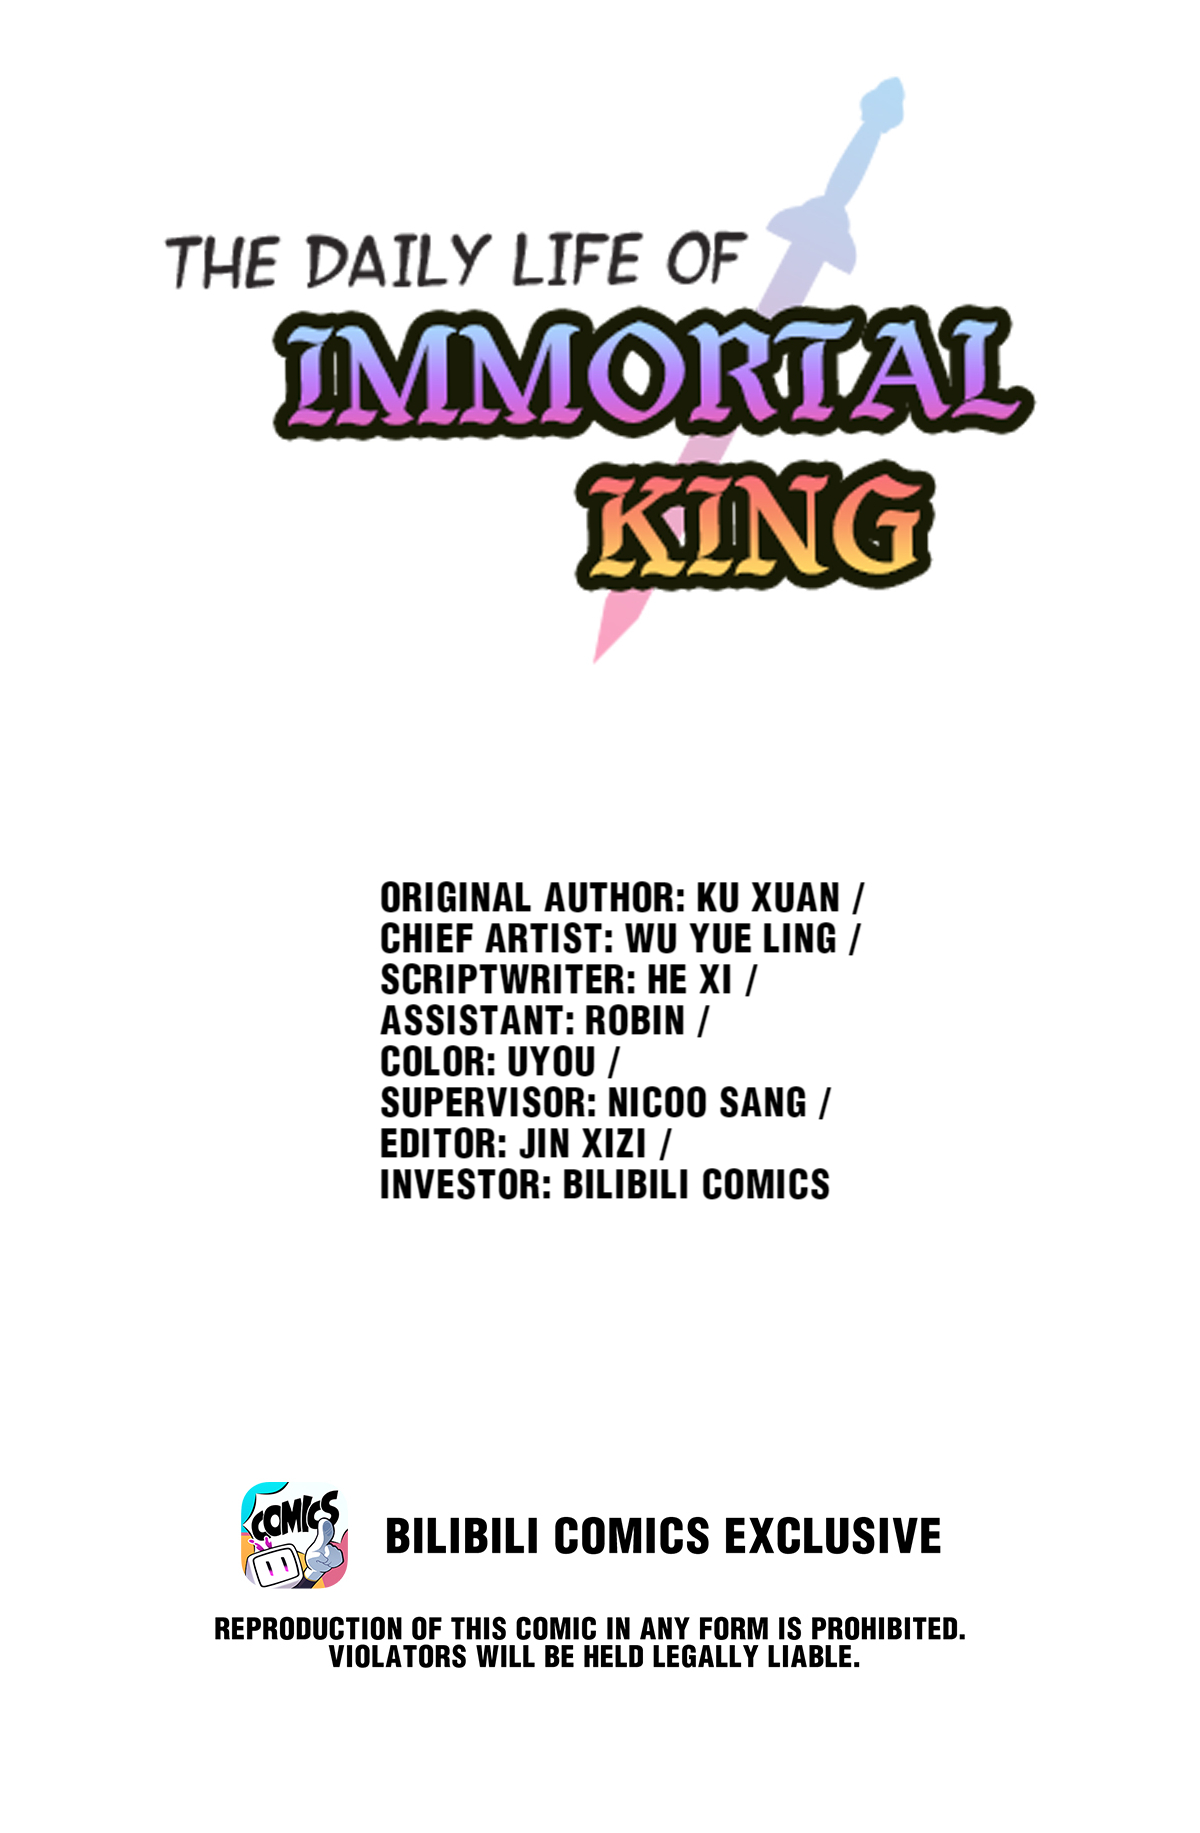 The Daily Life of Immortal King 64.1 THIS IS THE BIGGEST OF DEALS!